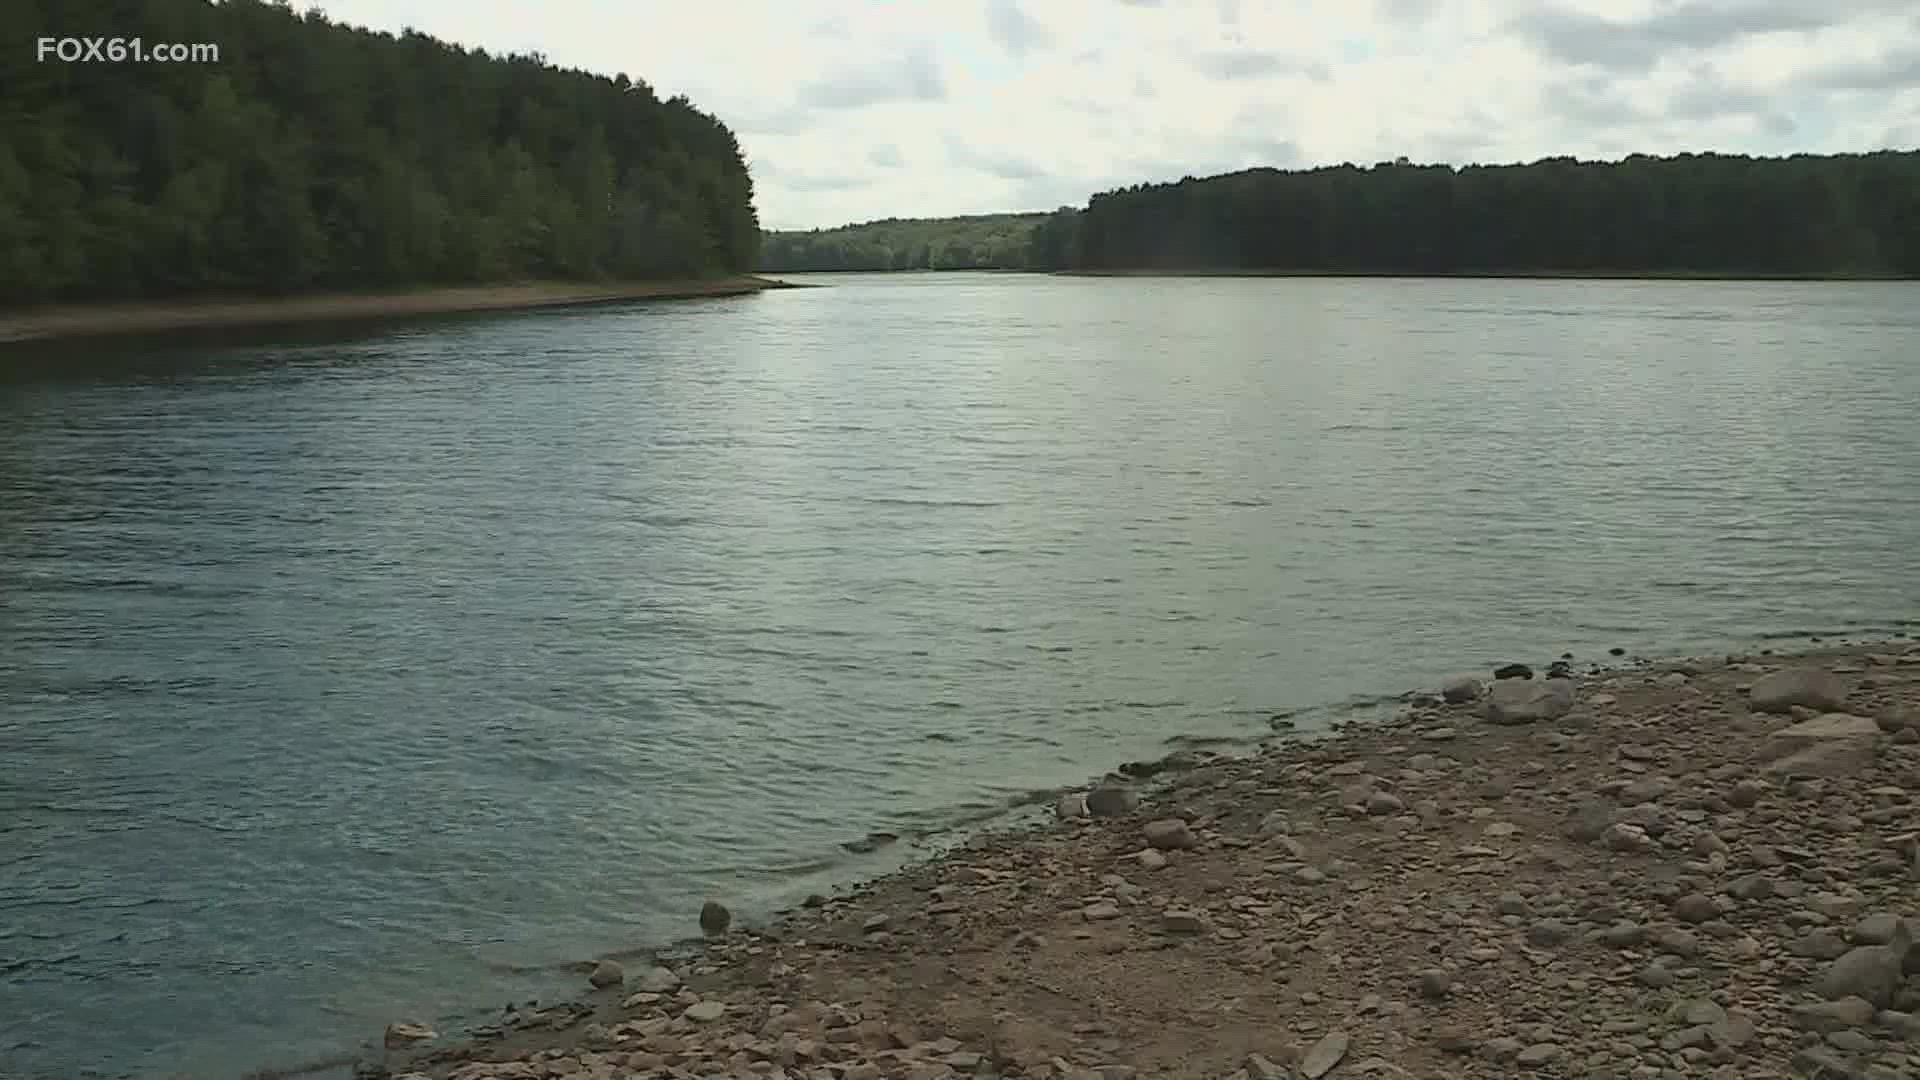 The two reservoirs are at just over 70% of their capacity as of Monday morning, according to officials.